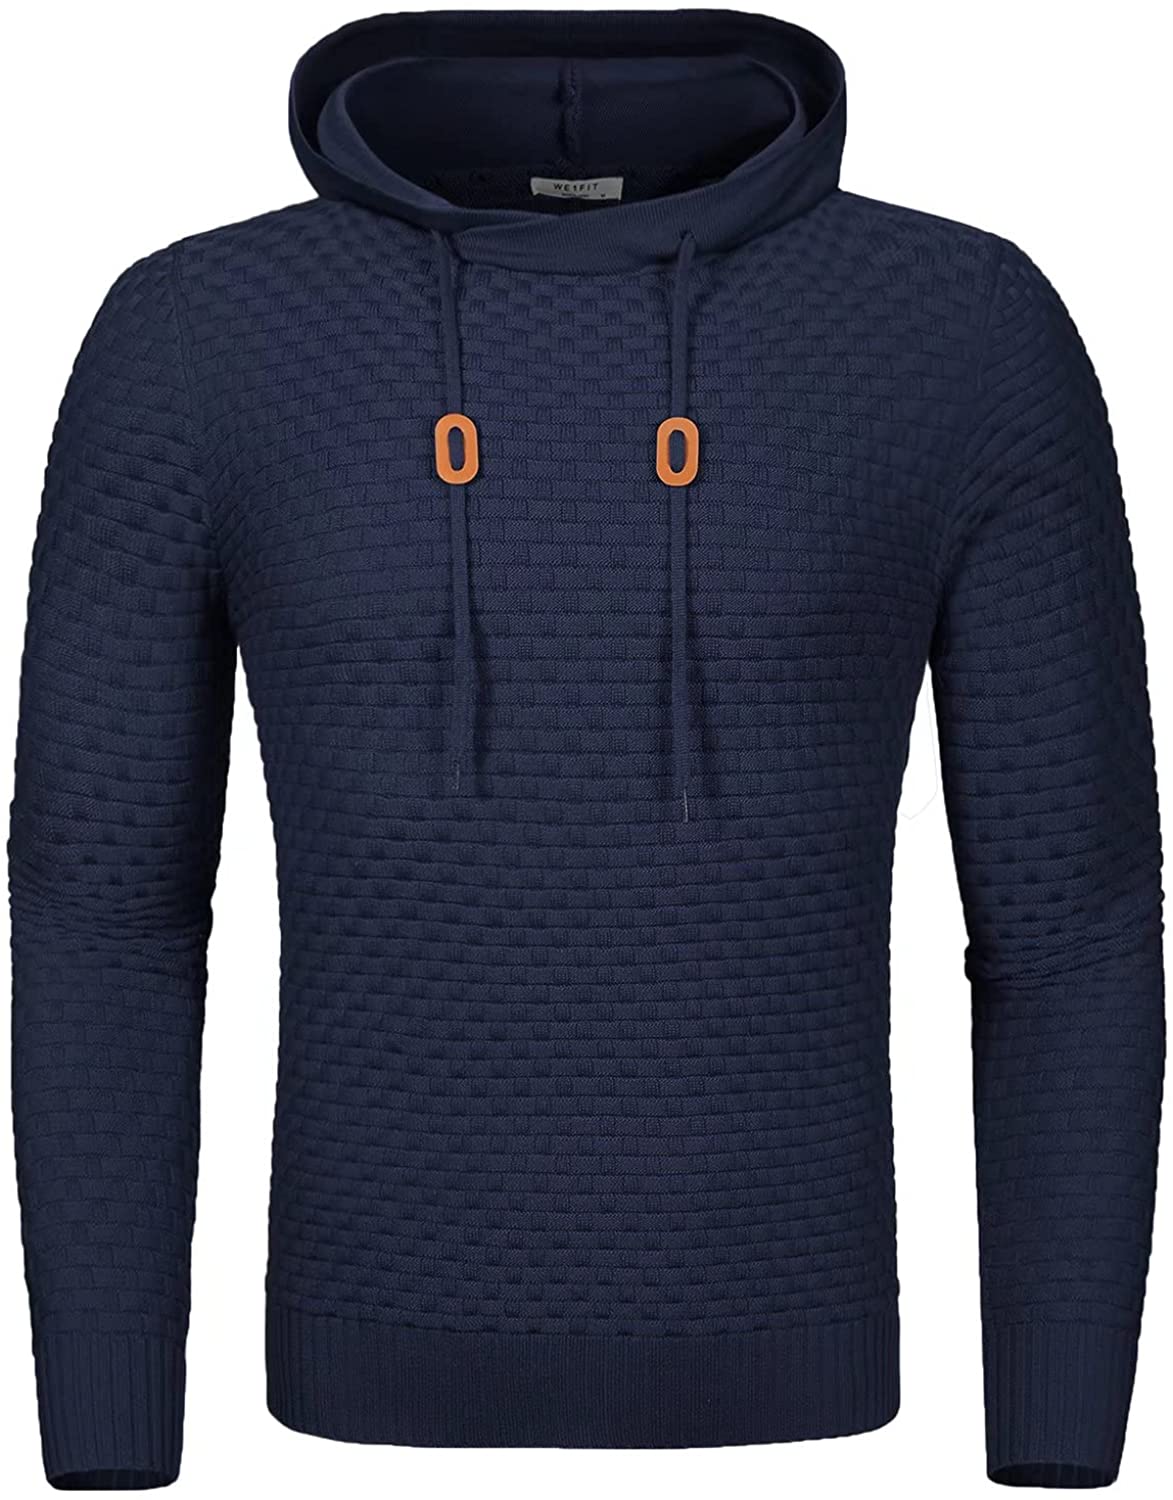 We1Fit Men's Hooded Sweatshirt Long Sleeve Solid Knitted Sweaters with Square Pattern 